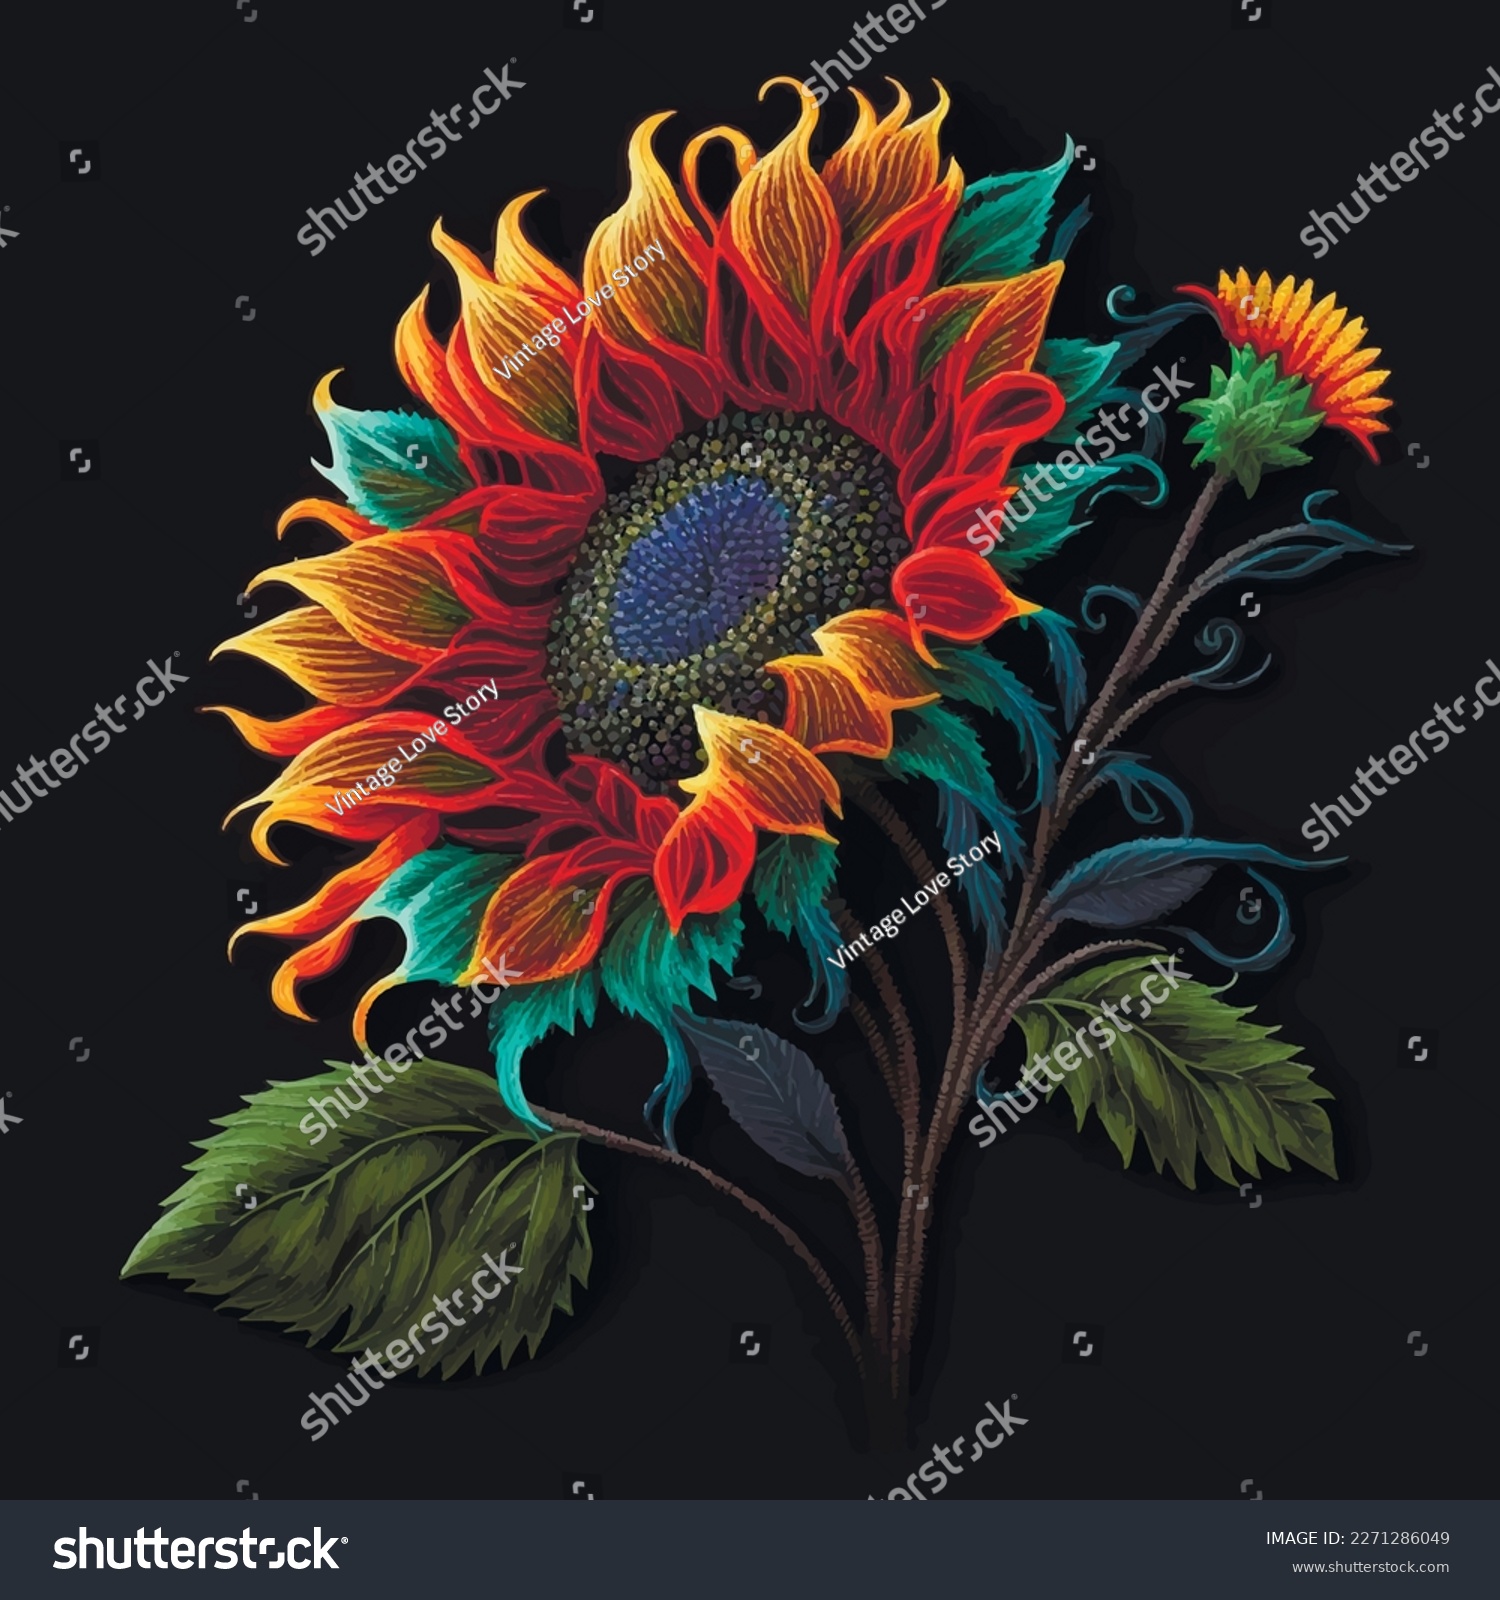 SVG of 3d sunflower. Tapestry bright sunflower, buds, leaves pattern. Embroidery floral vector background illustration with beautiful stitch textured sunflowers. Surface stitching texture. For decor, prints. svg